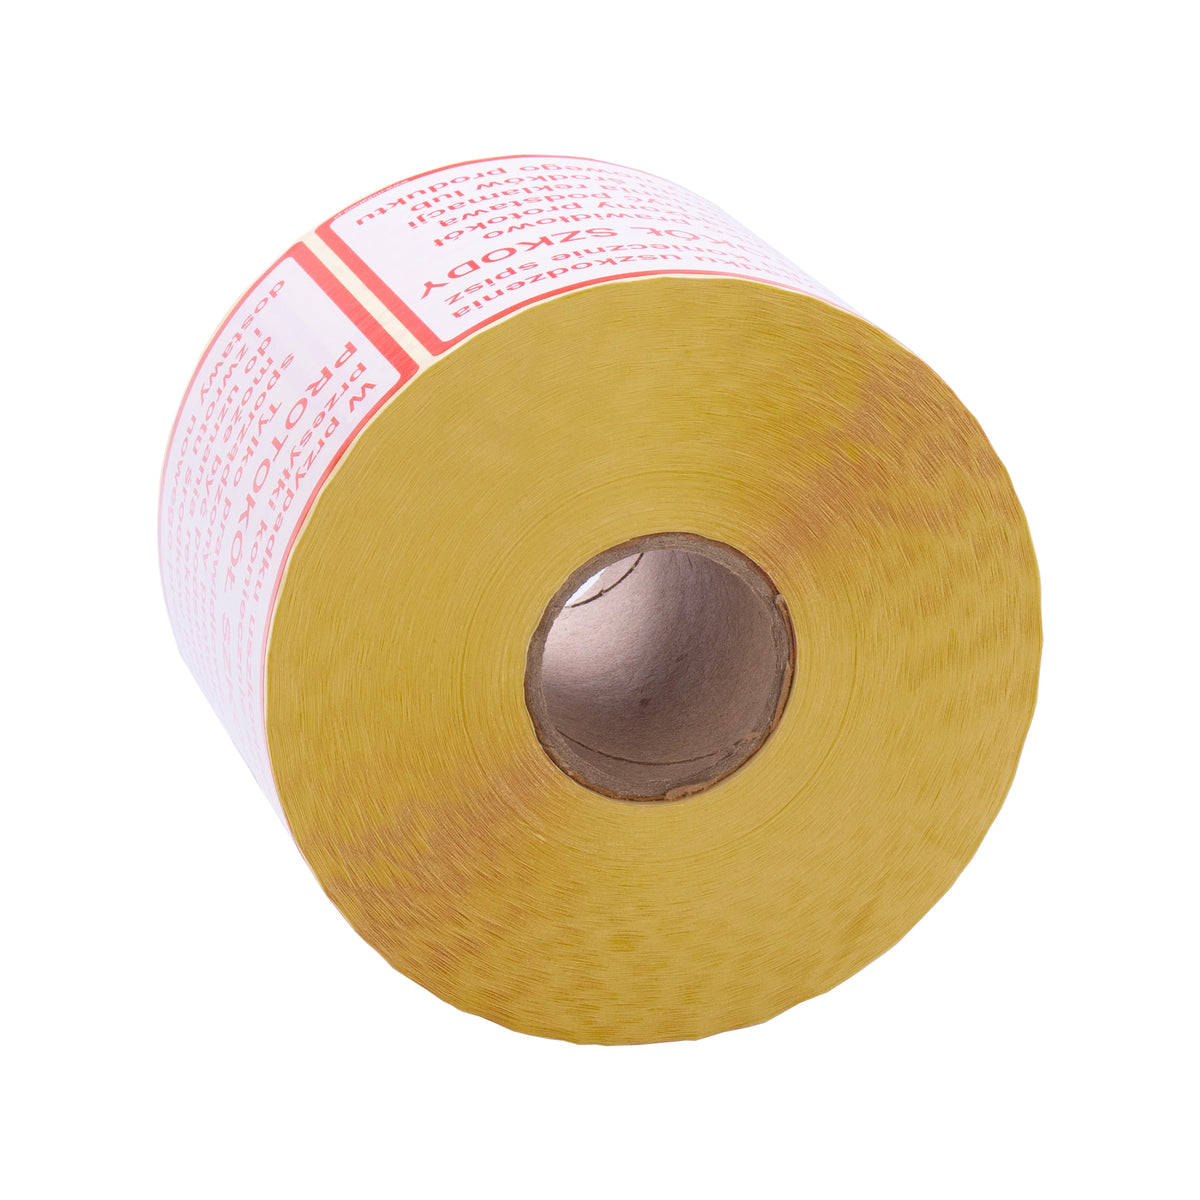 Self-adhesive warning labels - Damage report/certificate of compliance - 98x98mm 1000 per roll